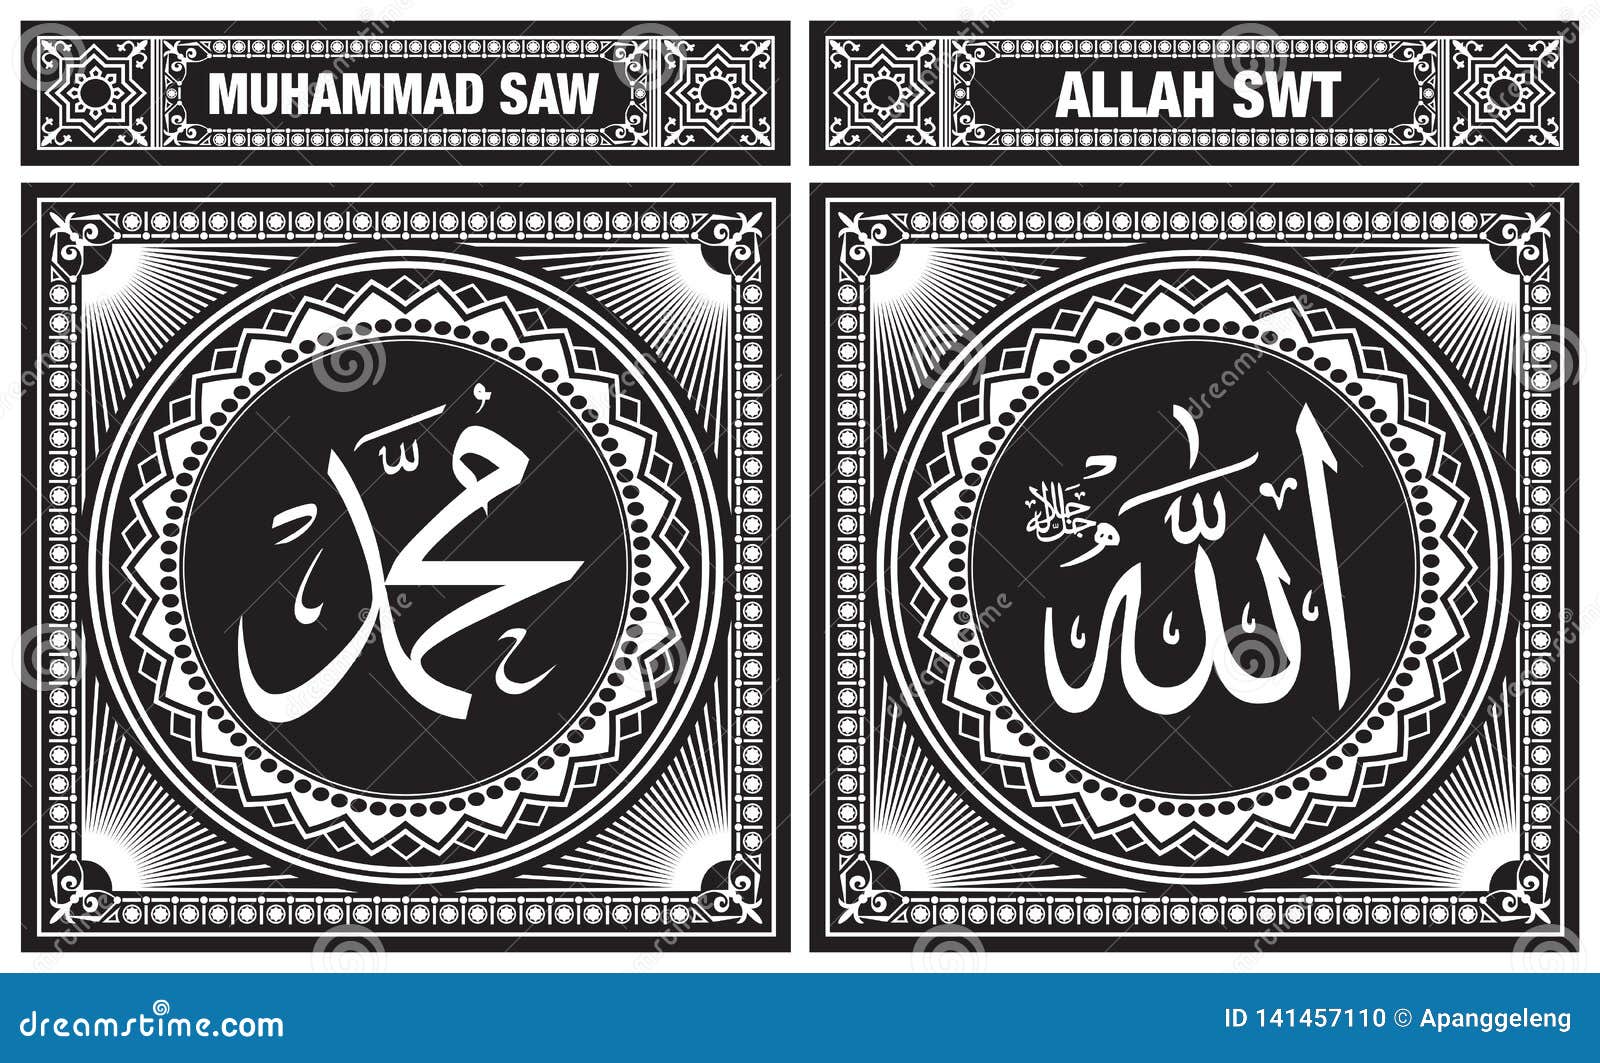 allah & muhammad islamic art calligraphy in black and white ready for foil print